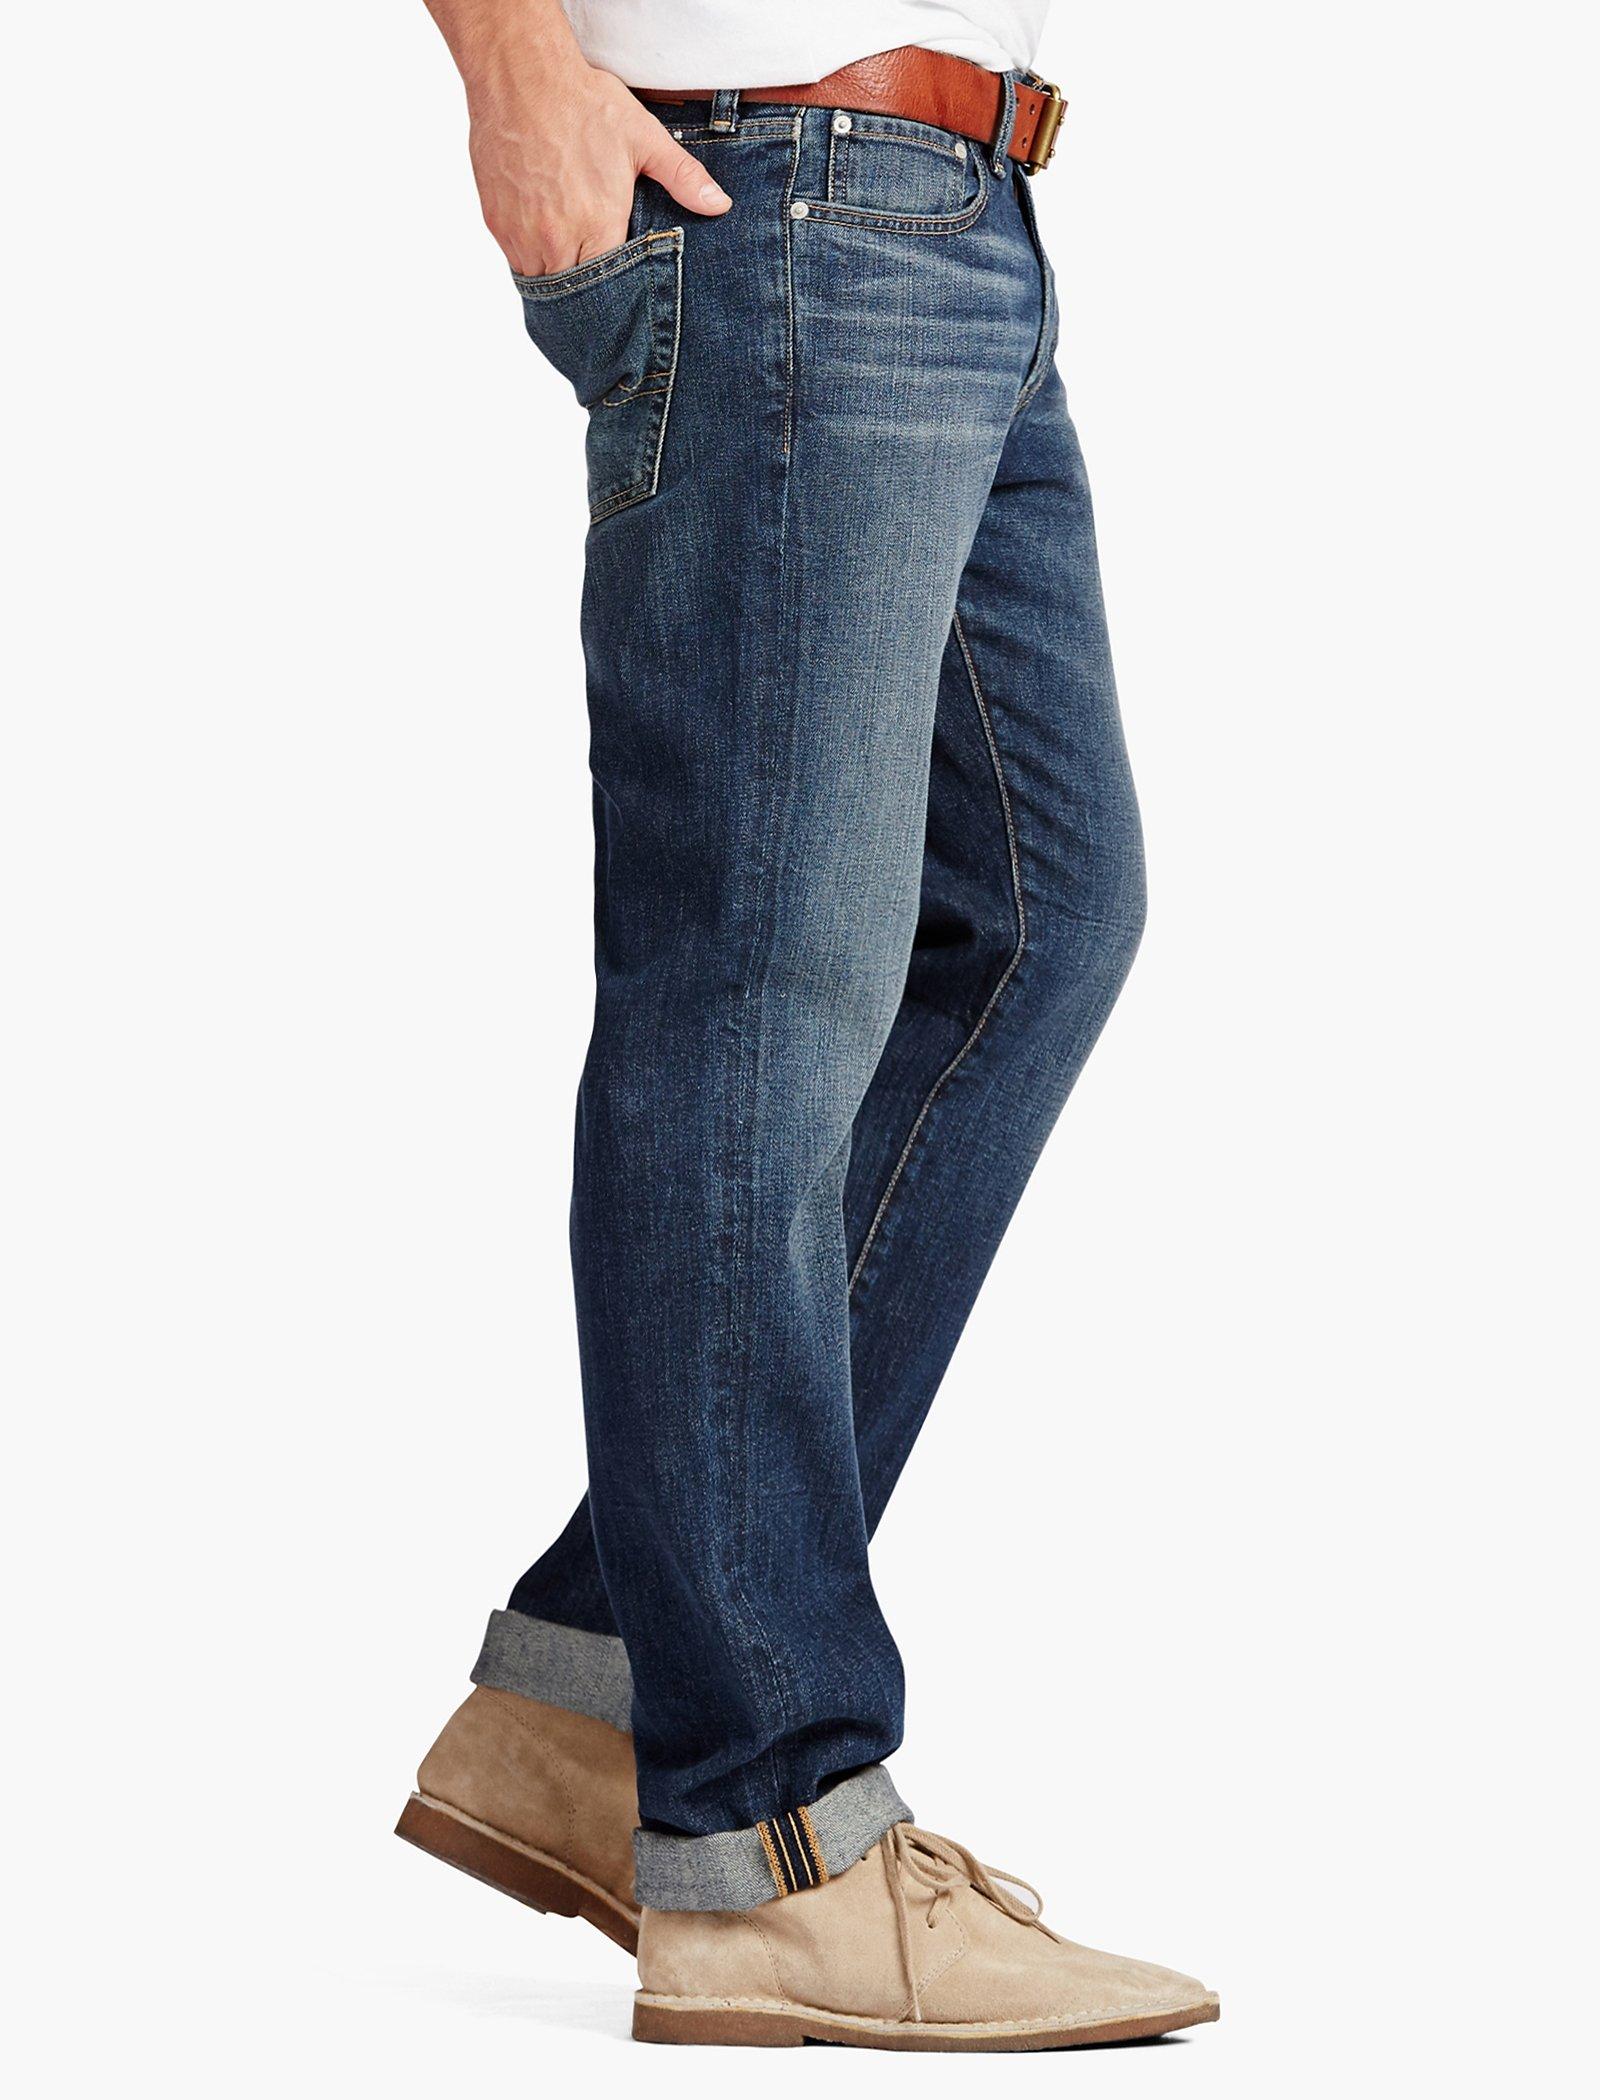 410 ATHLETIC STRAIGHT COOLMAX STRETCH JEAN Lucky Brand, 57% OFF